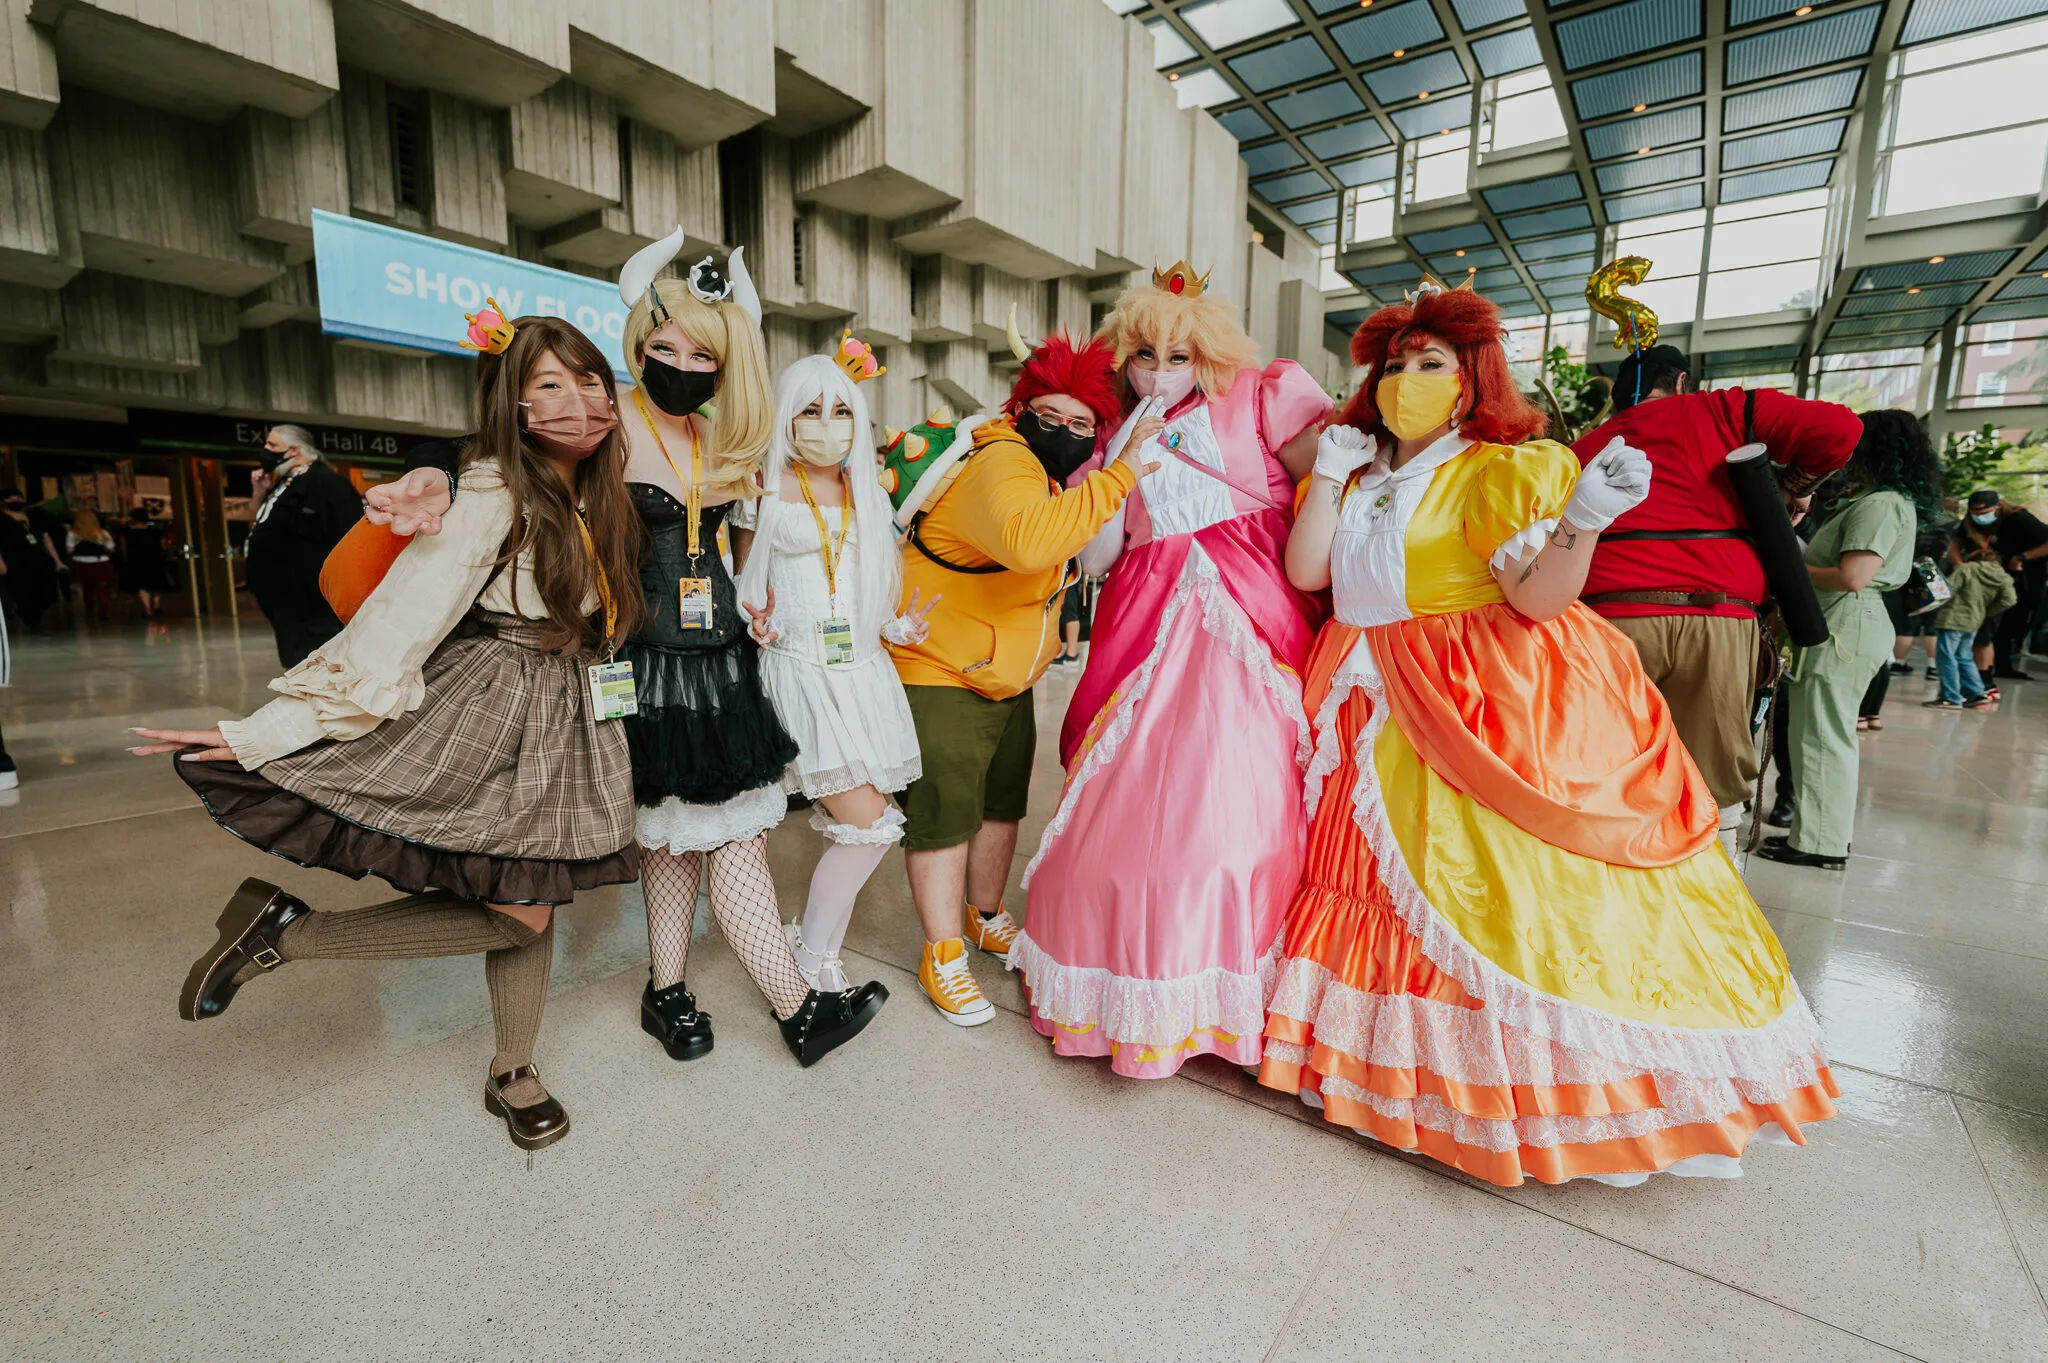 A group of cosplayers pose together at Emerald City Comic Con